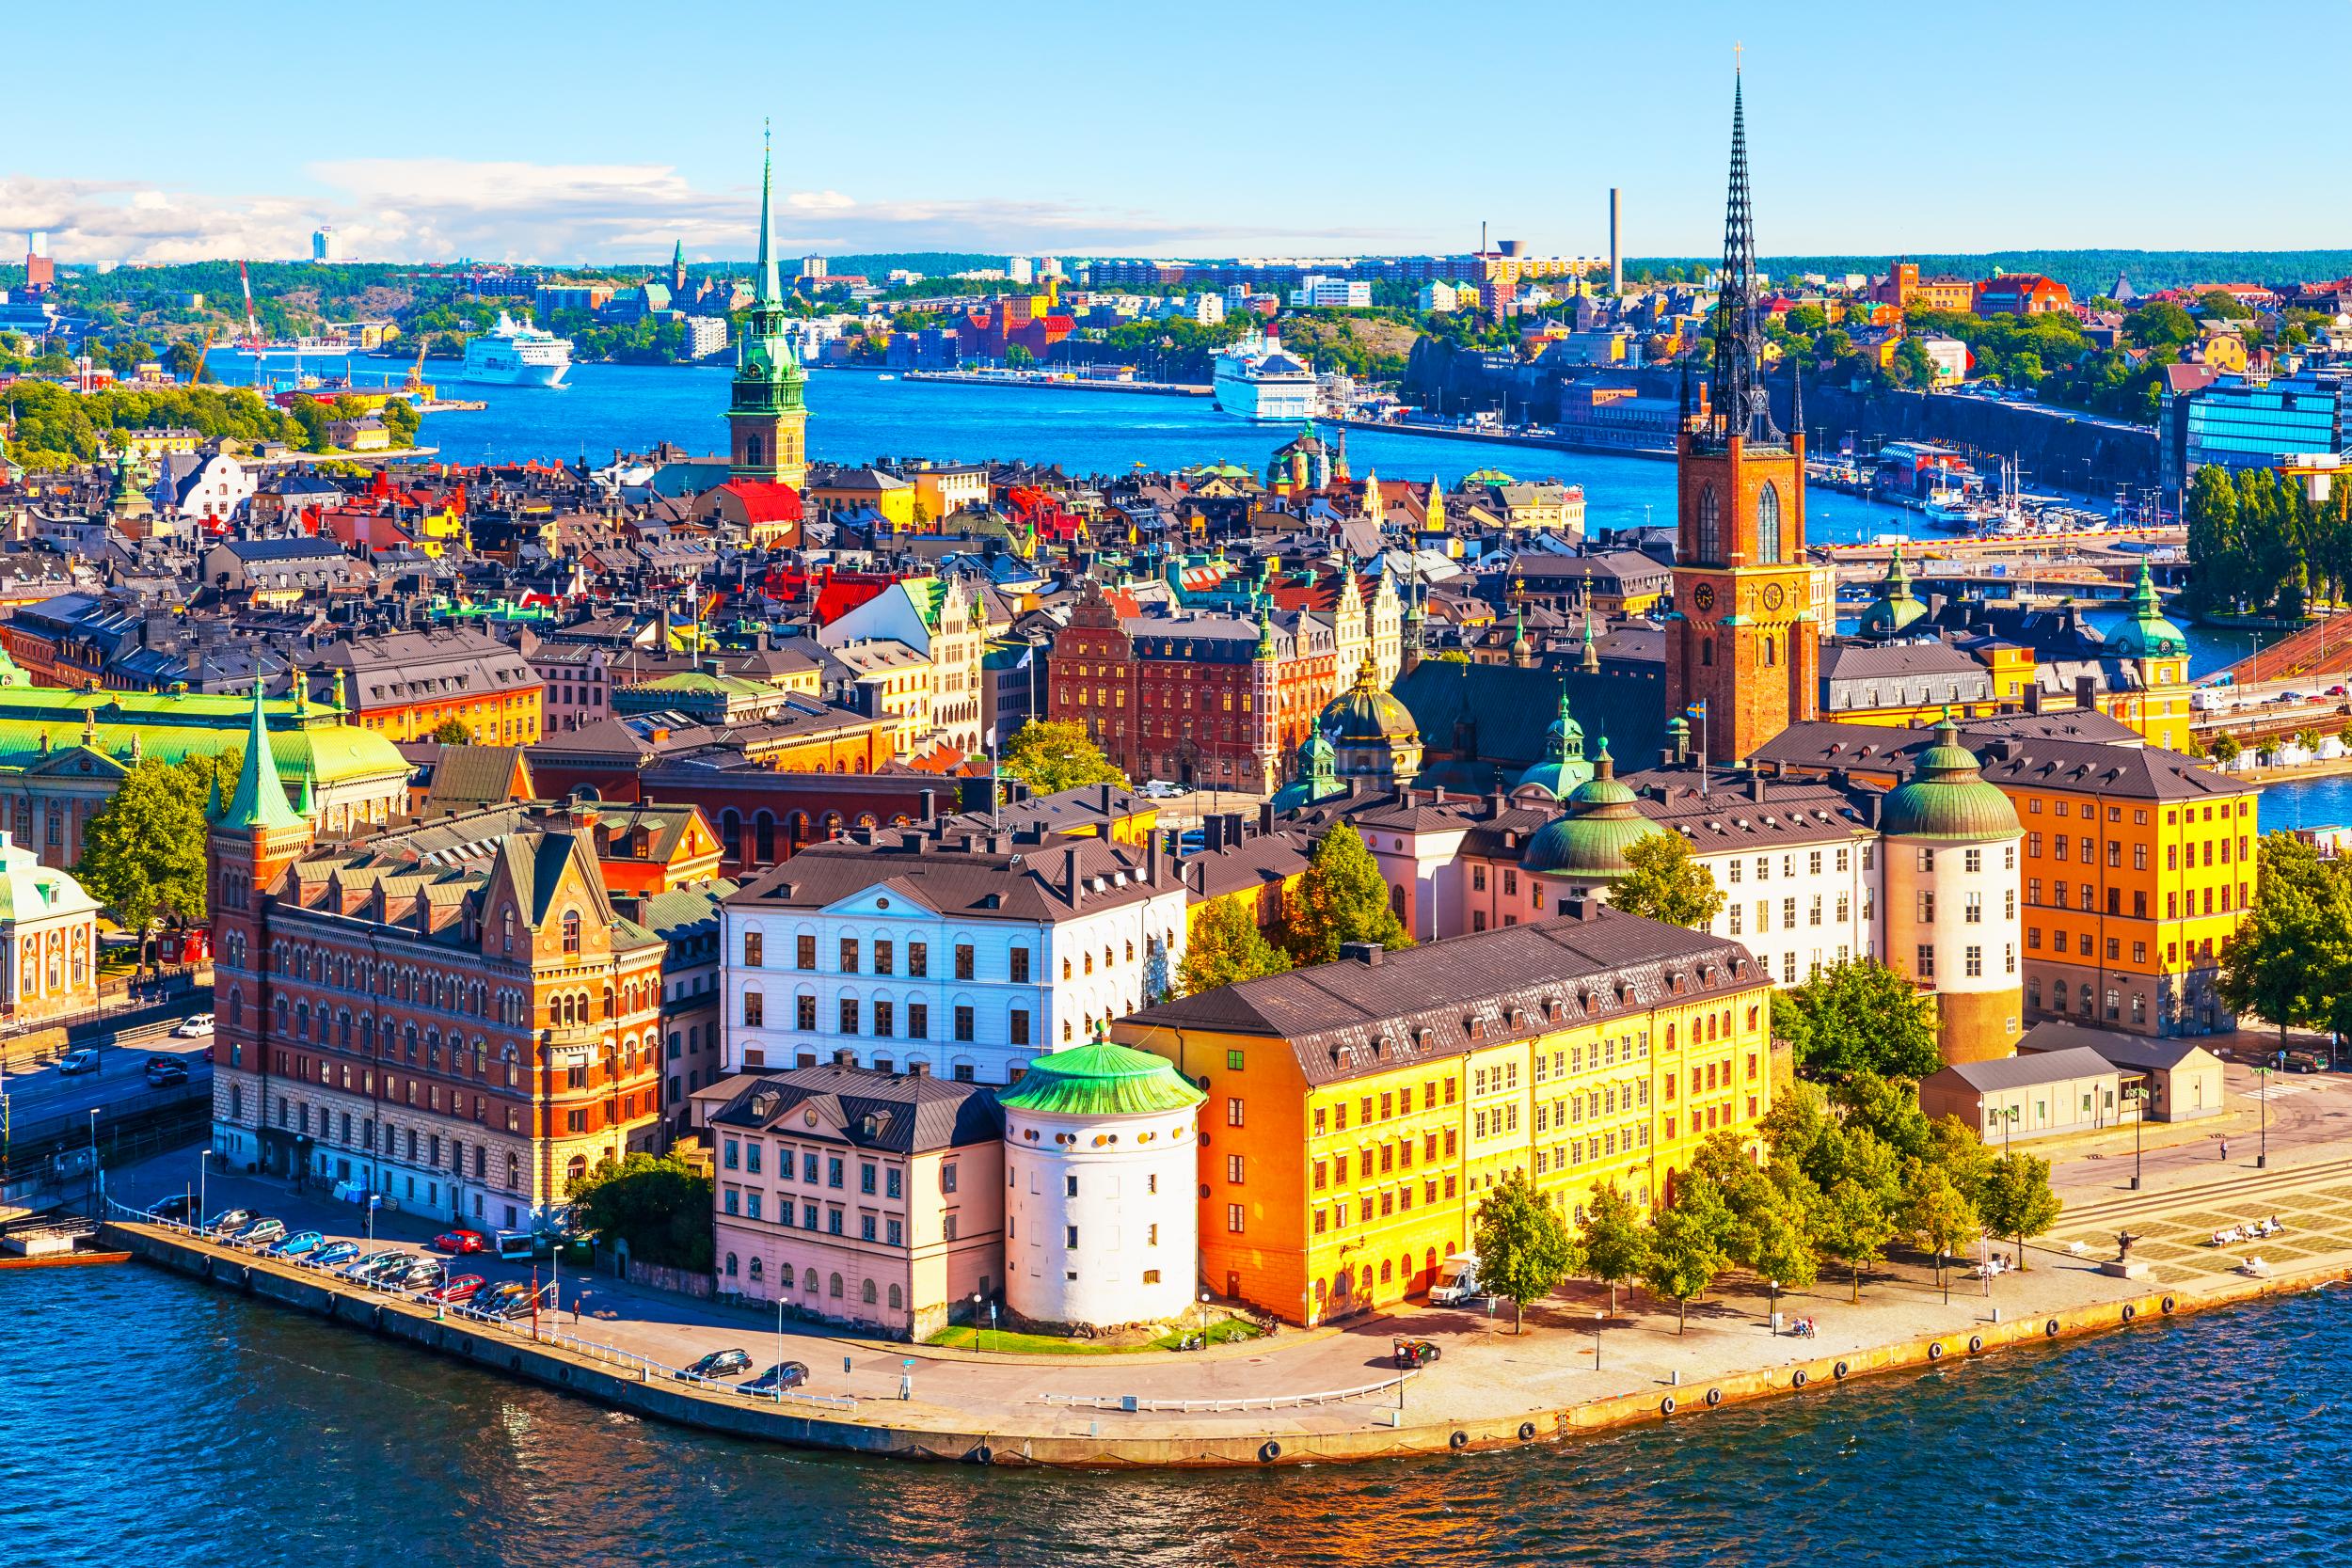 Stockholm’s phenomenal success has caught the attention of the world and rippled out across the Nordic region